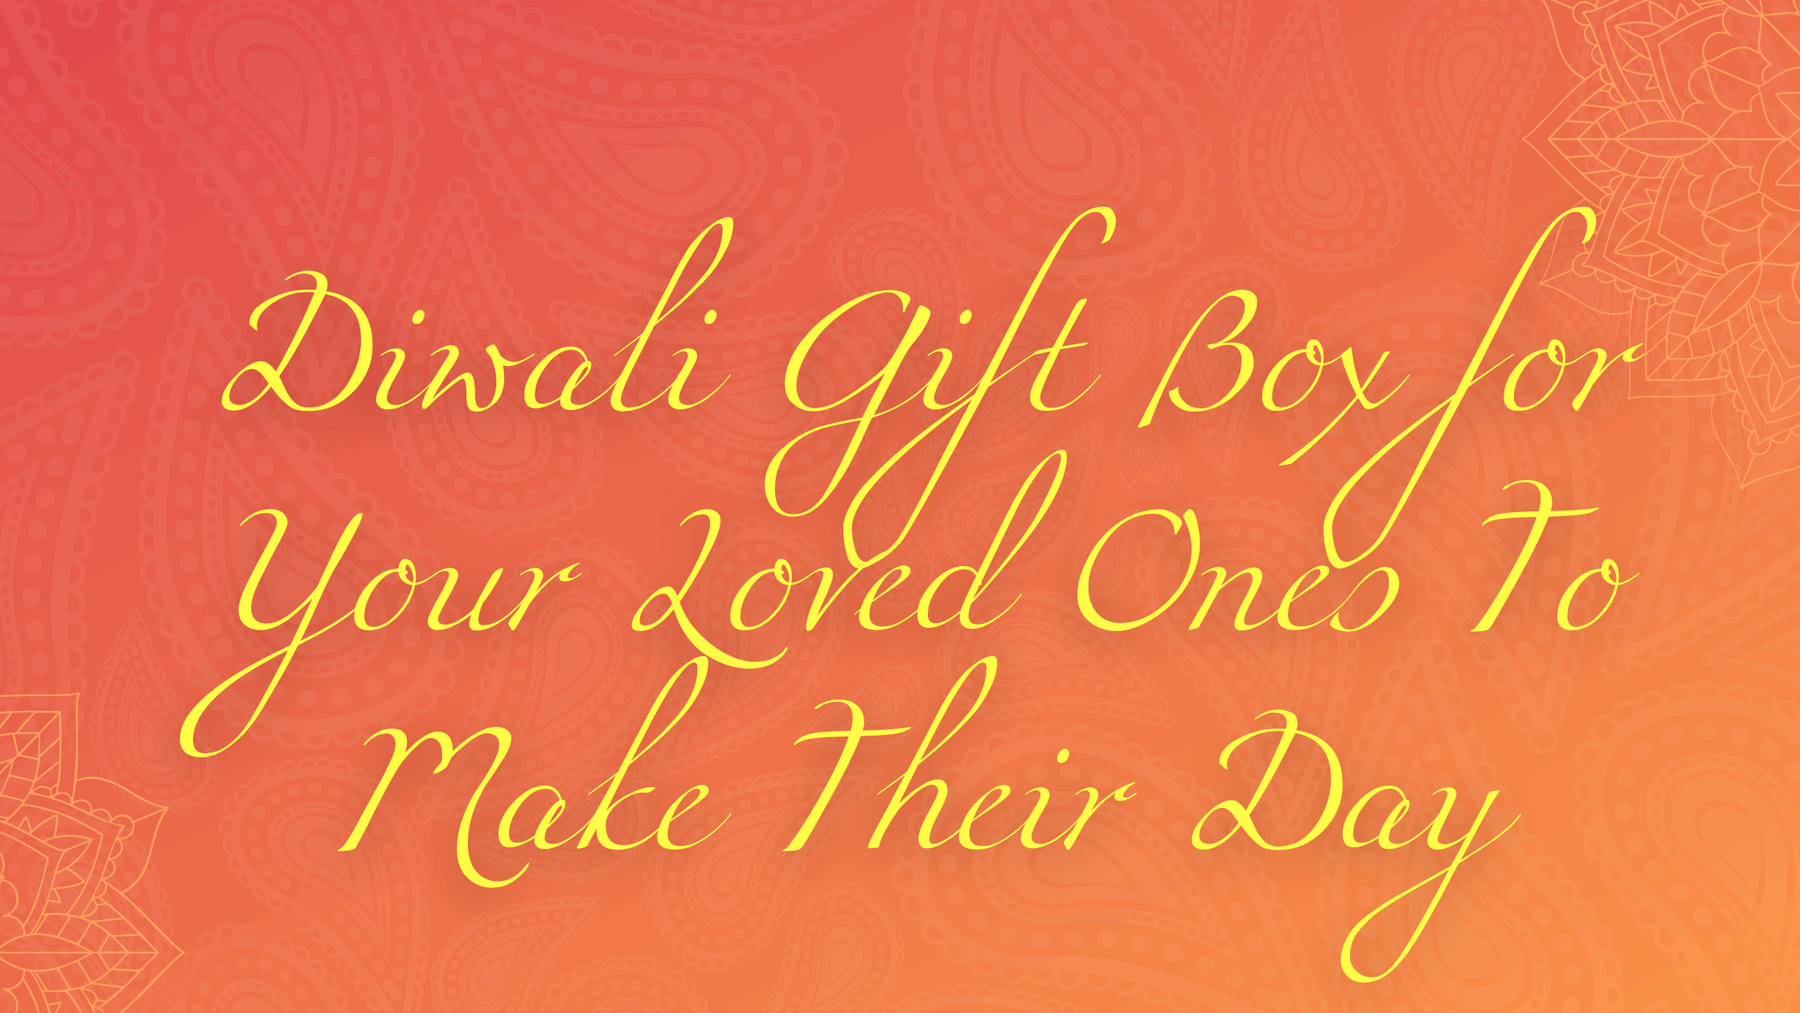 Diwali Gift Box for Your Loved Ones To Make Their Day